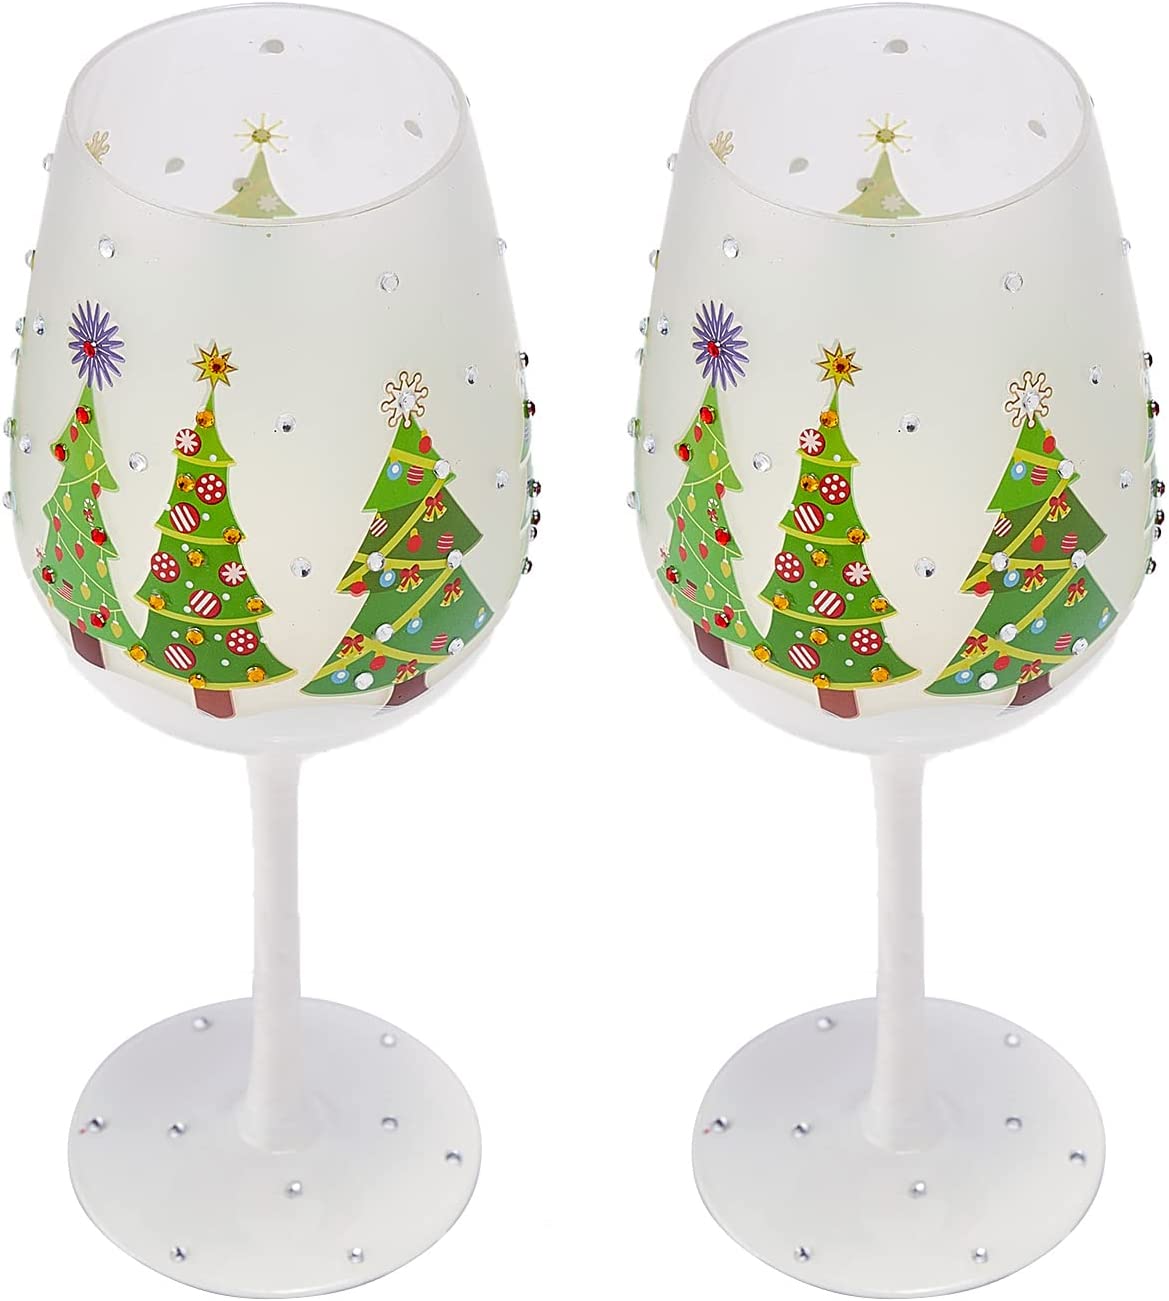 Set of 2 Stemmed Christmas Tree Design Wine Glasses - Hand Painted 14 oz Decorated Christmas Tree Glasses - Perfect for Wine, Champagne, Holiday Parties and Festivities - 8.75" High, 14 oz Capacity-2